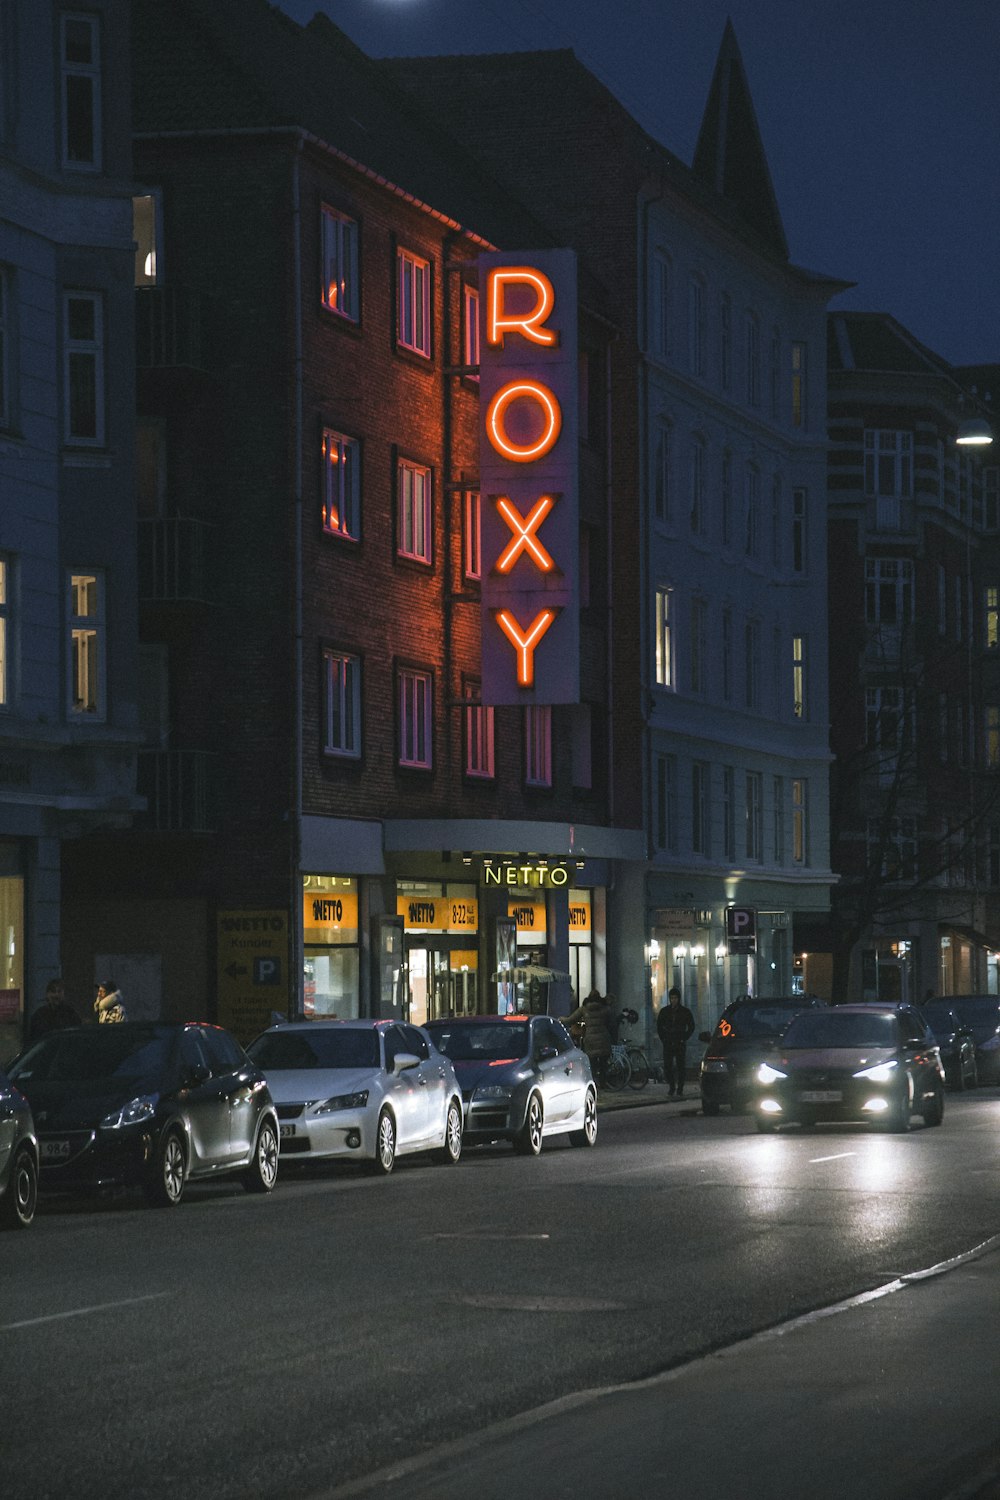 vehicles in front of Roxy establishment during nighttime